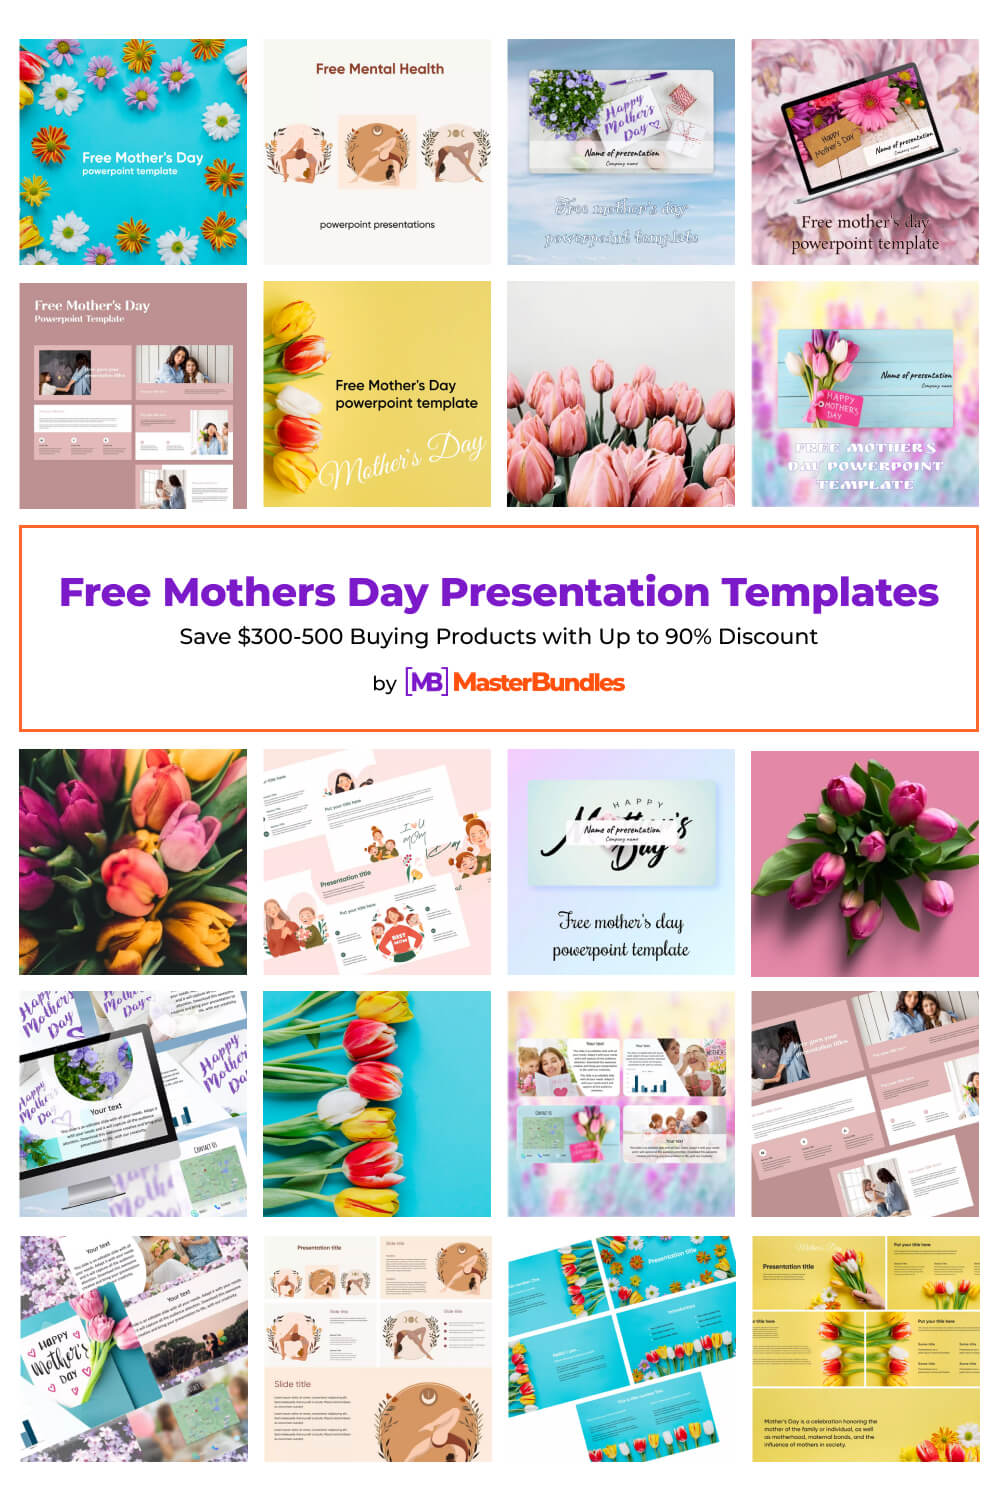 free mothers day presentation templates pinterest image.